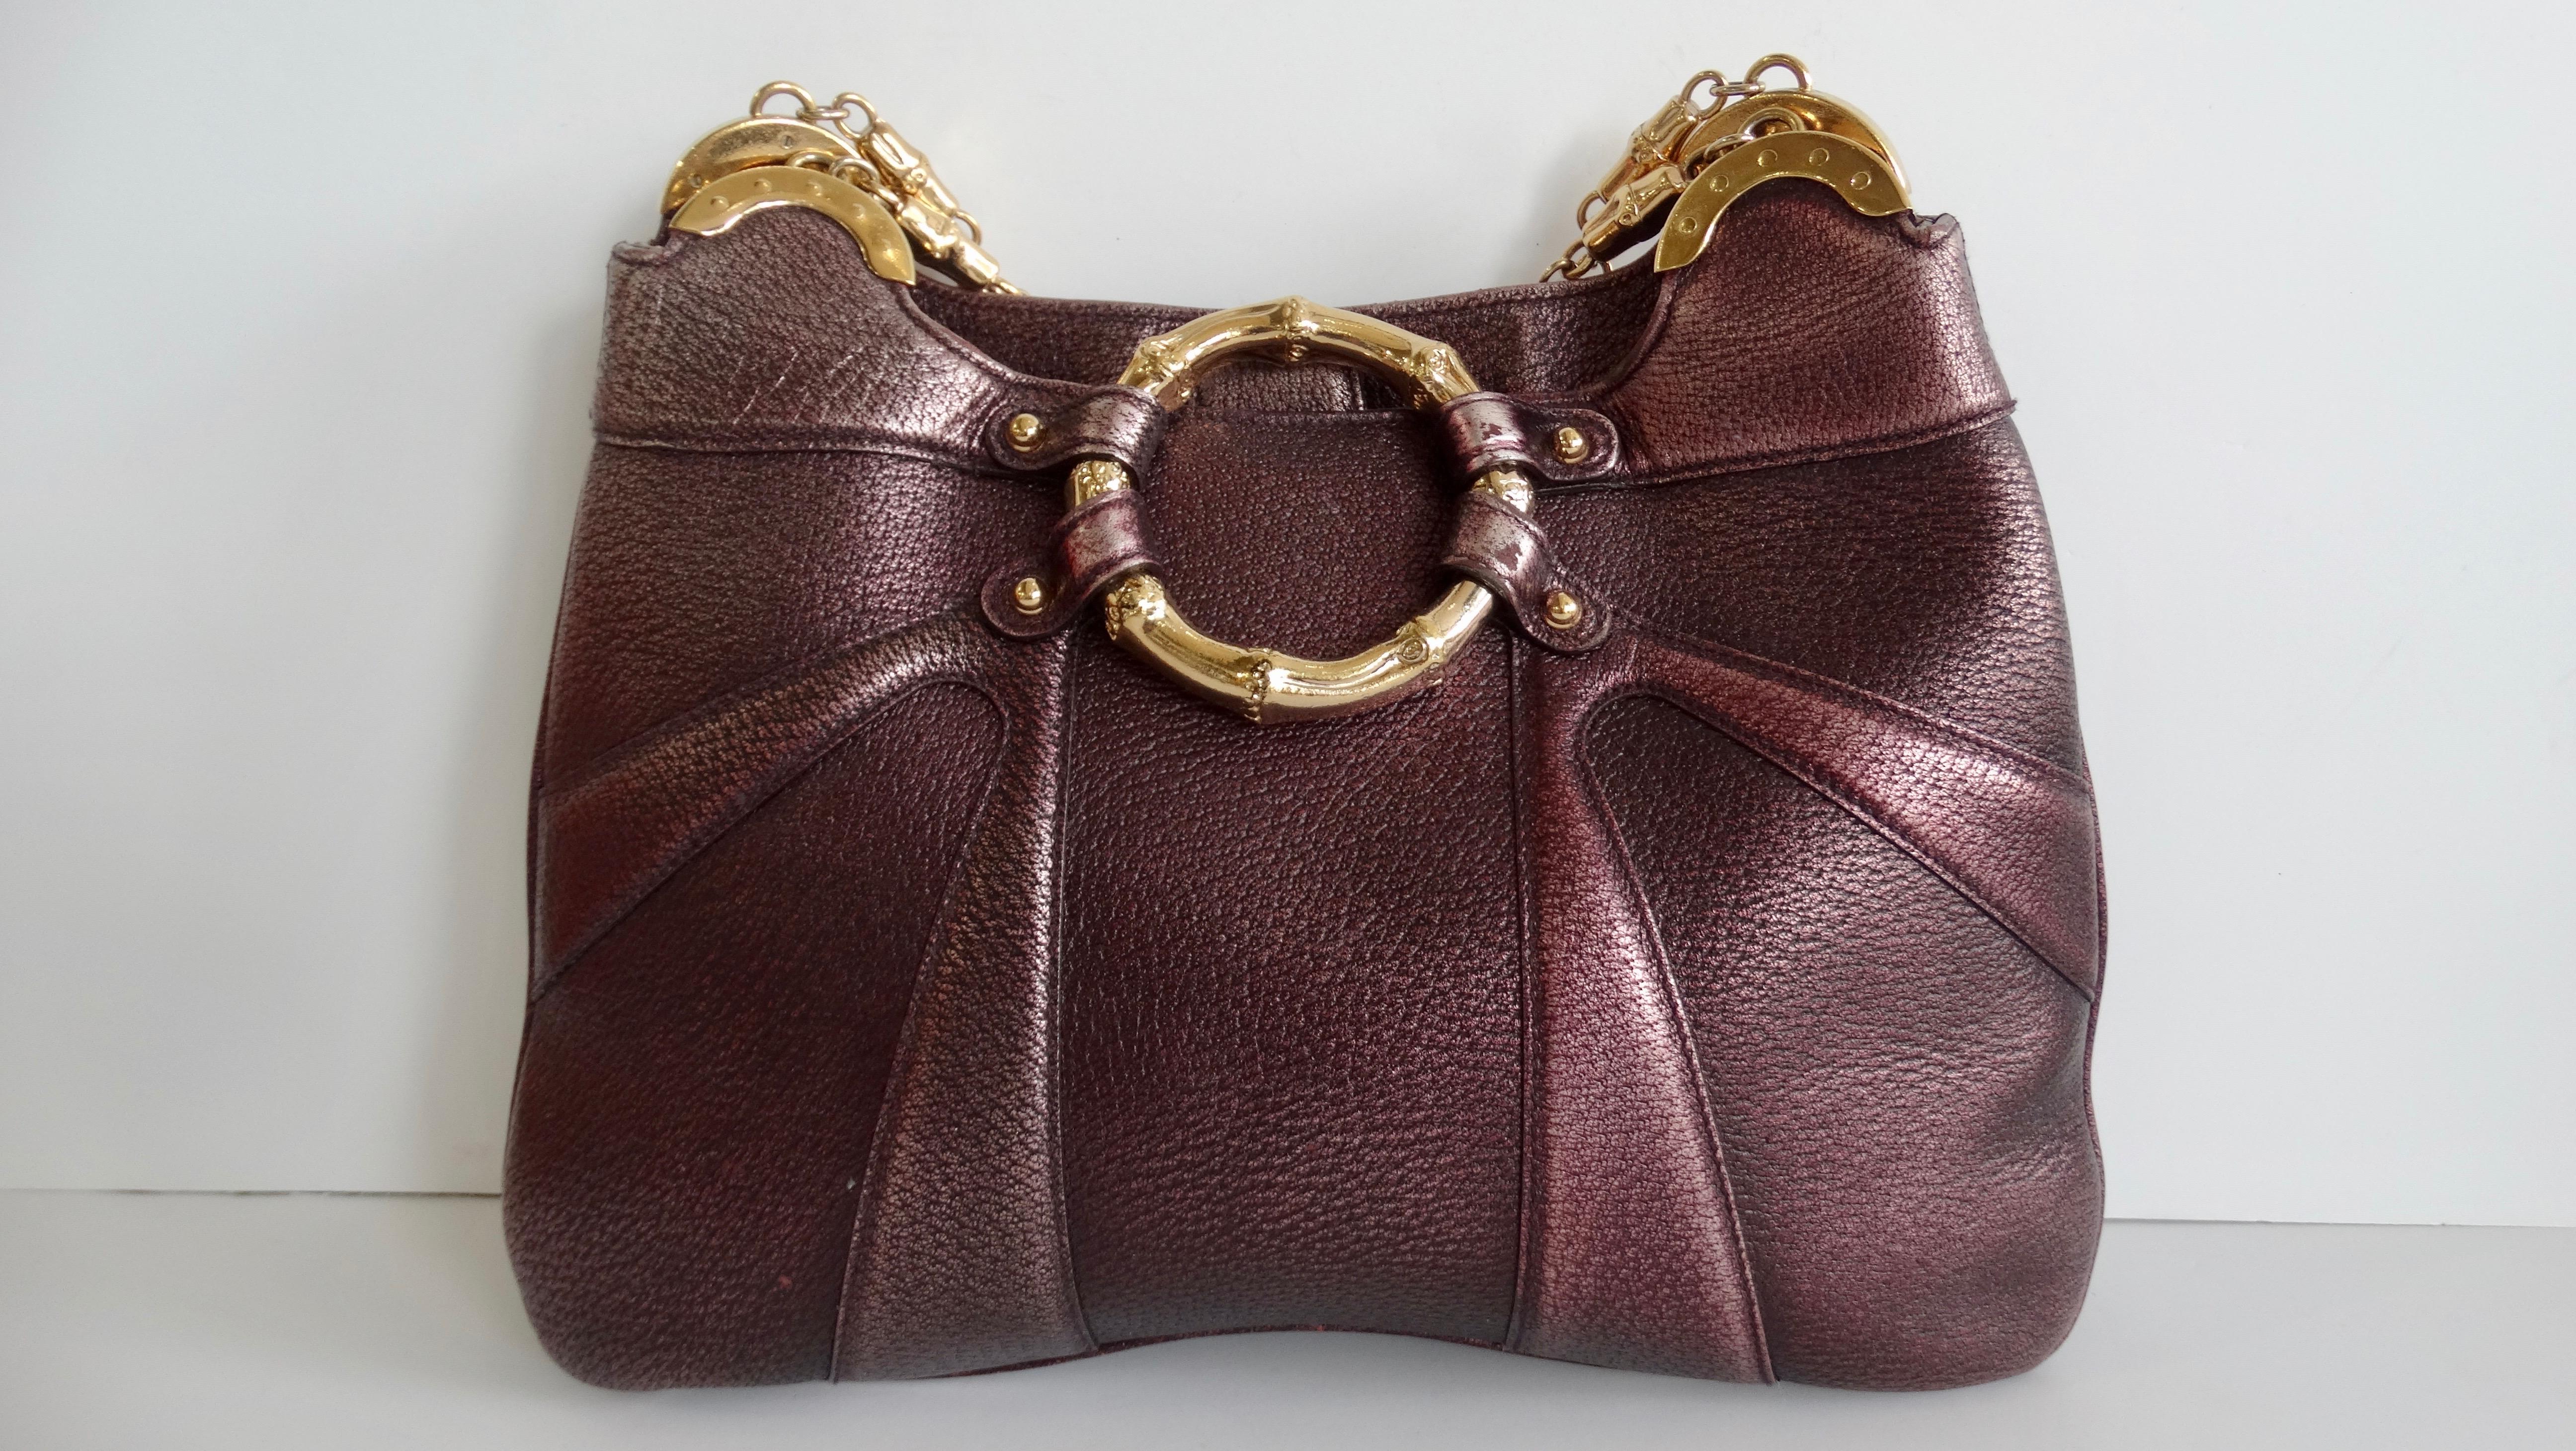  Tom Ford For Gucci 2000s Limited Edition Purple Bamboo Bag 5